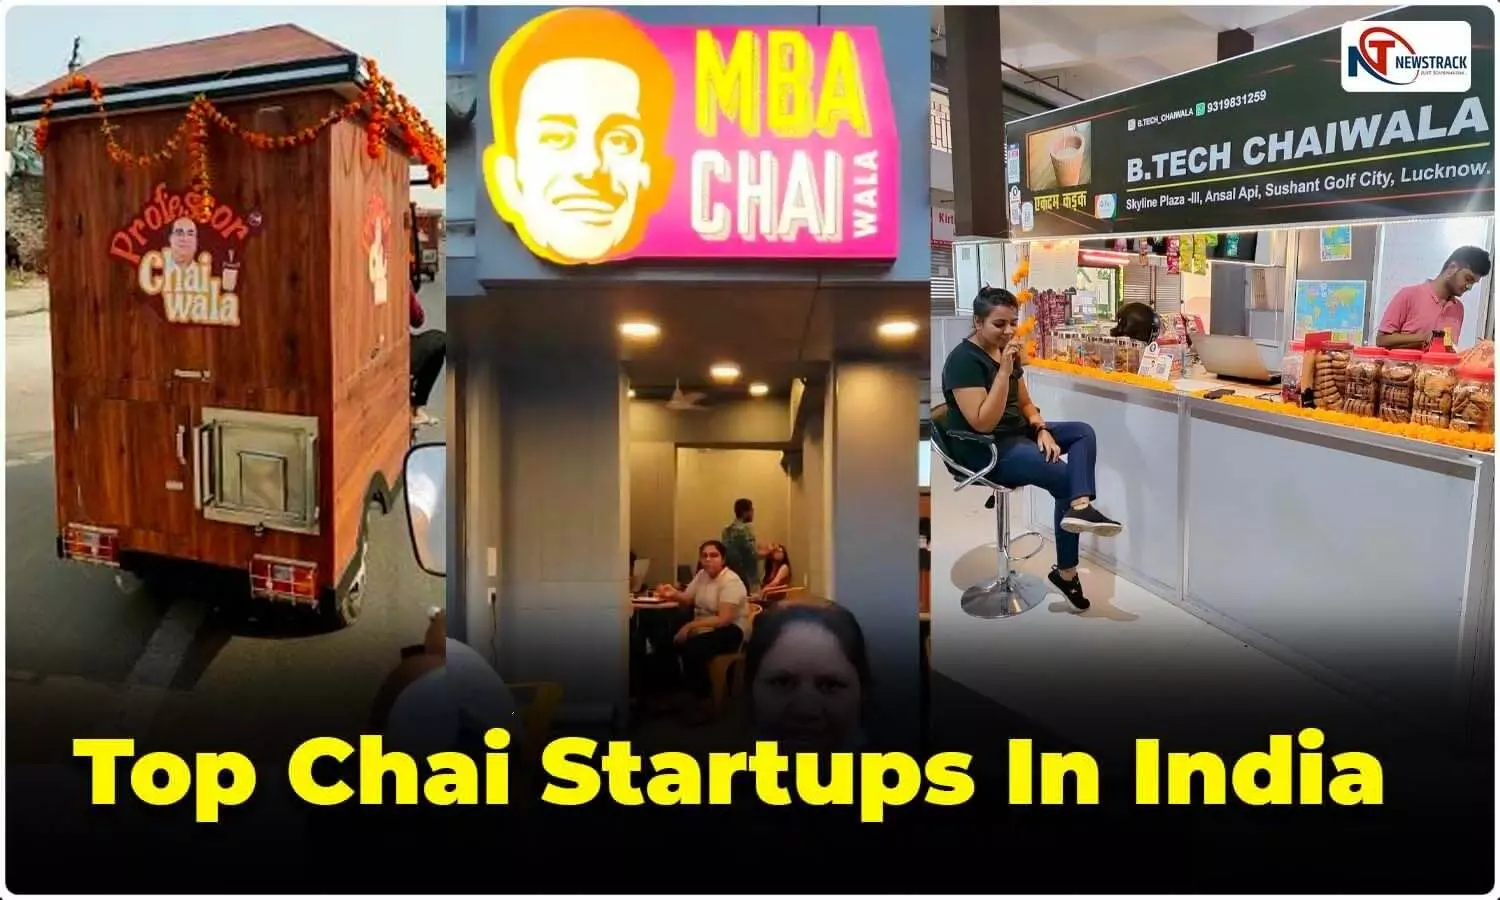 Top Chai Startups In India